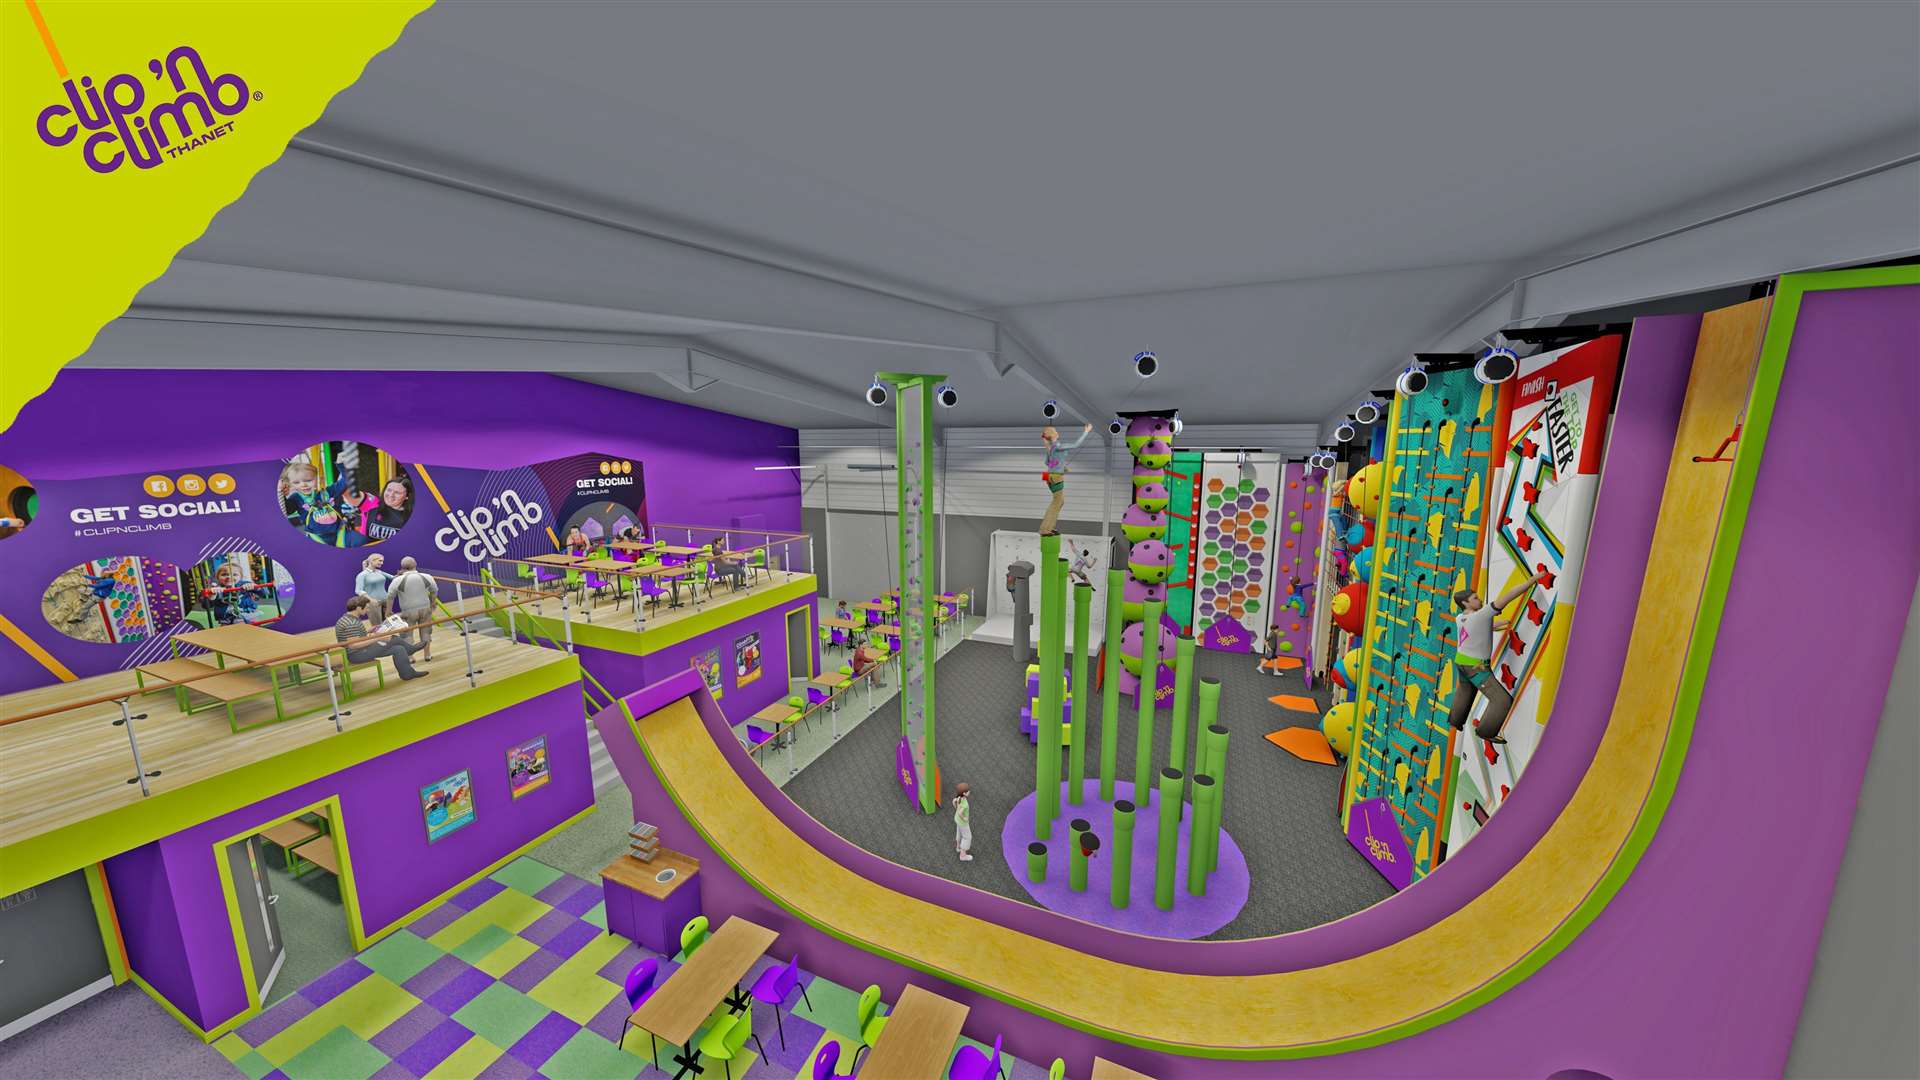 An image of how Clip n' Climb Thanet will look